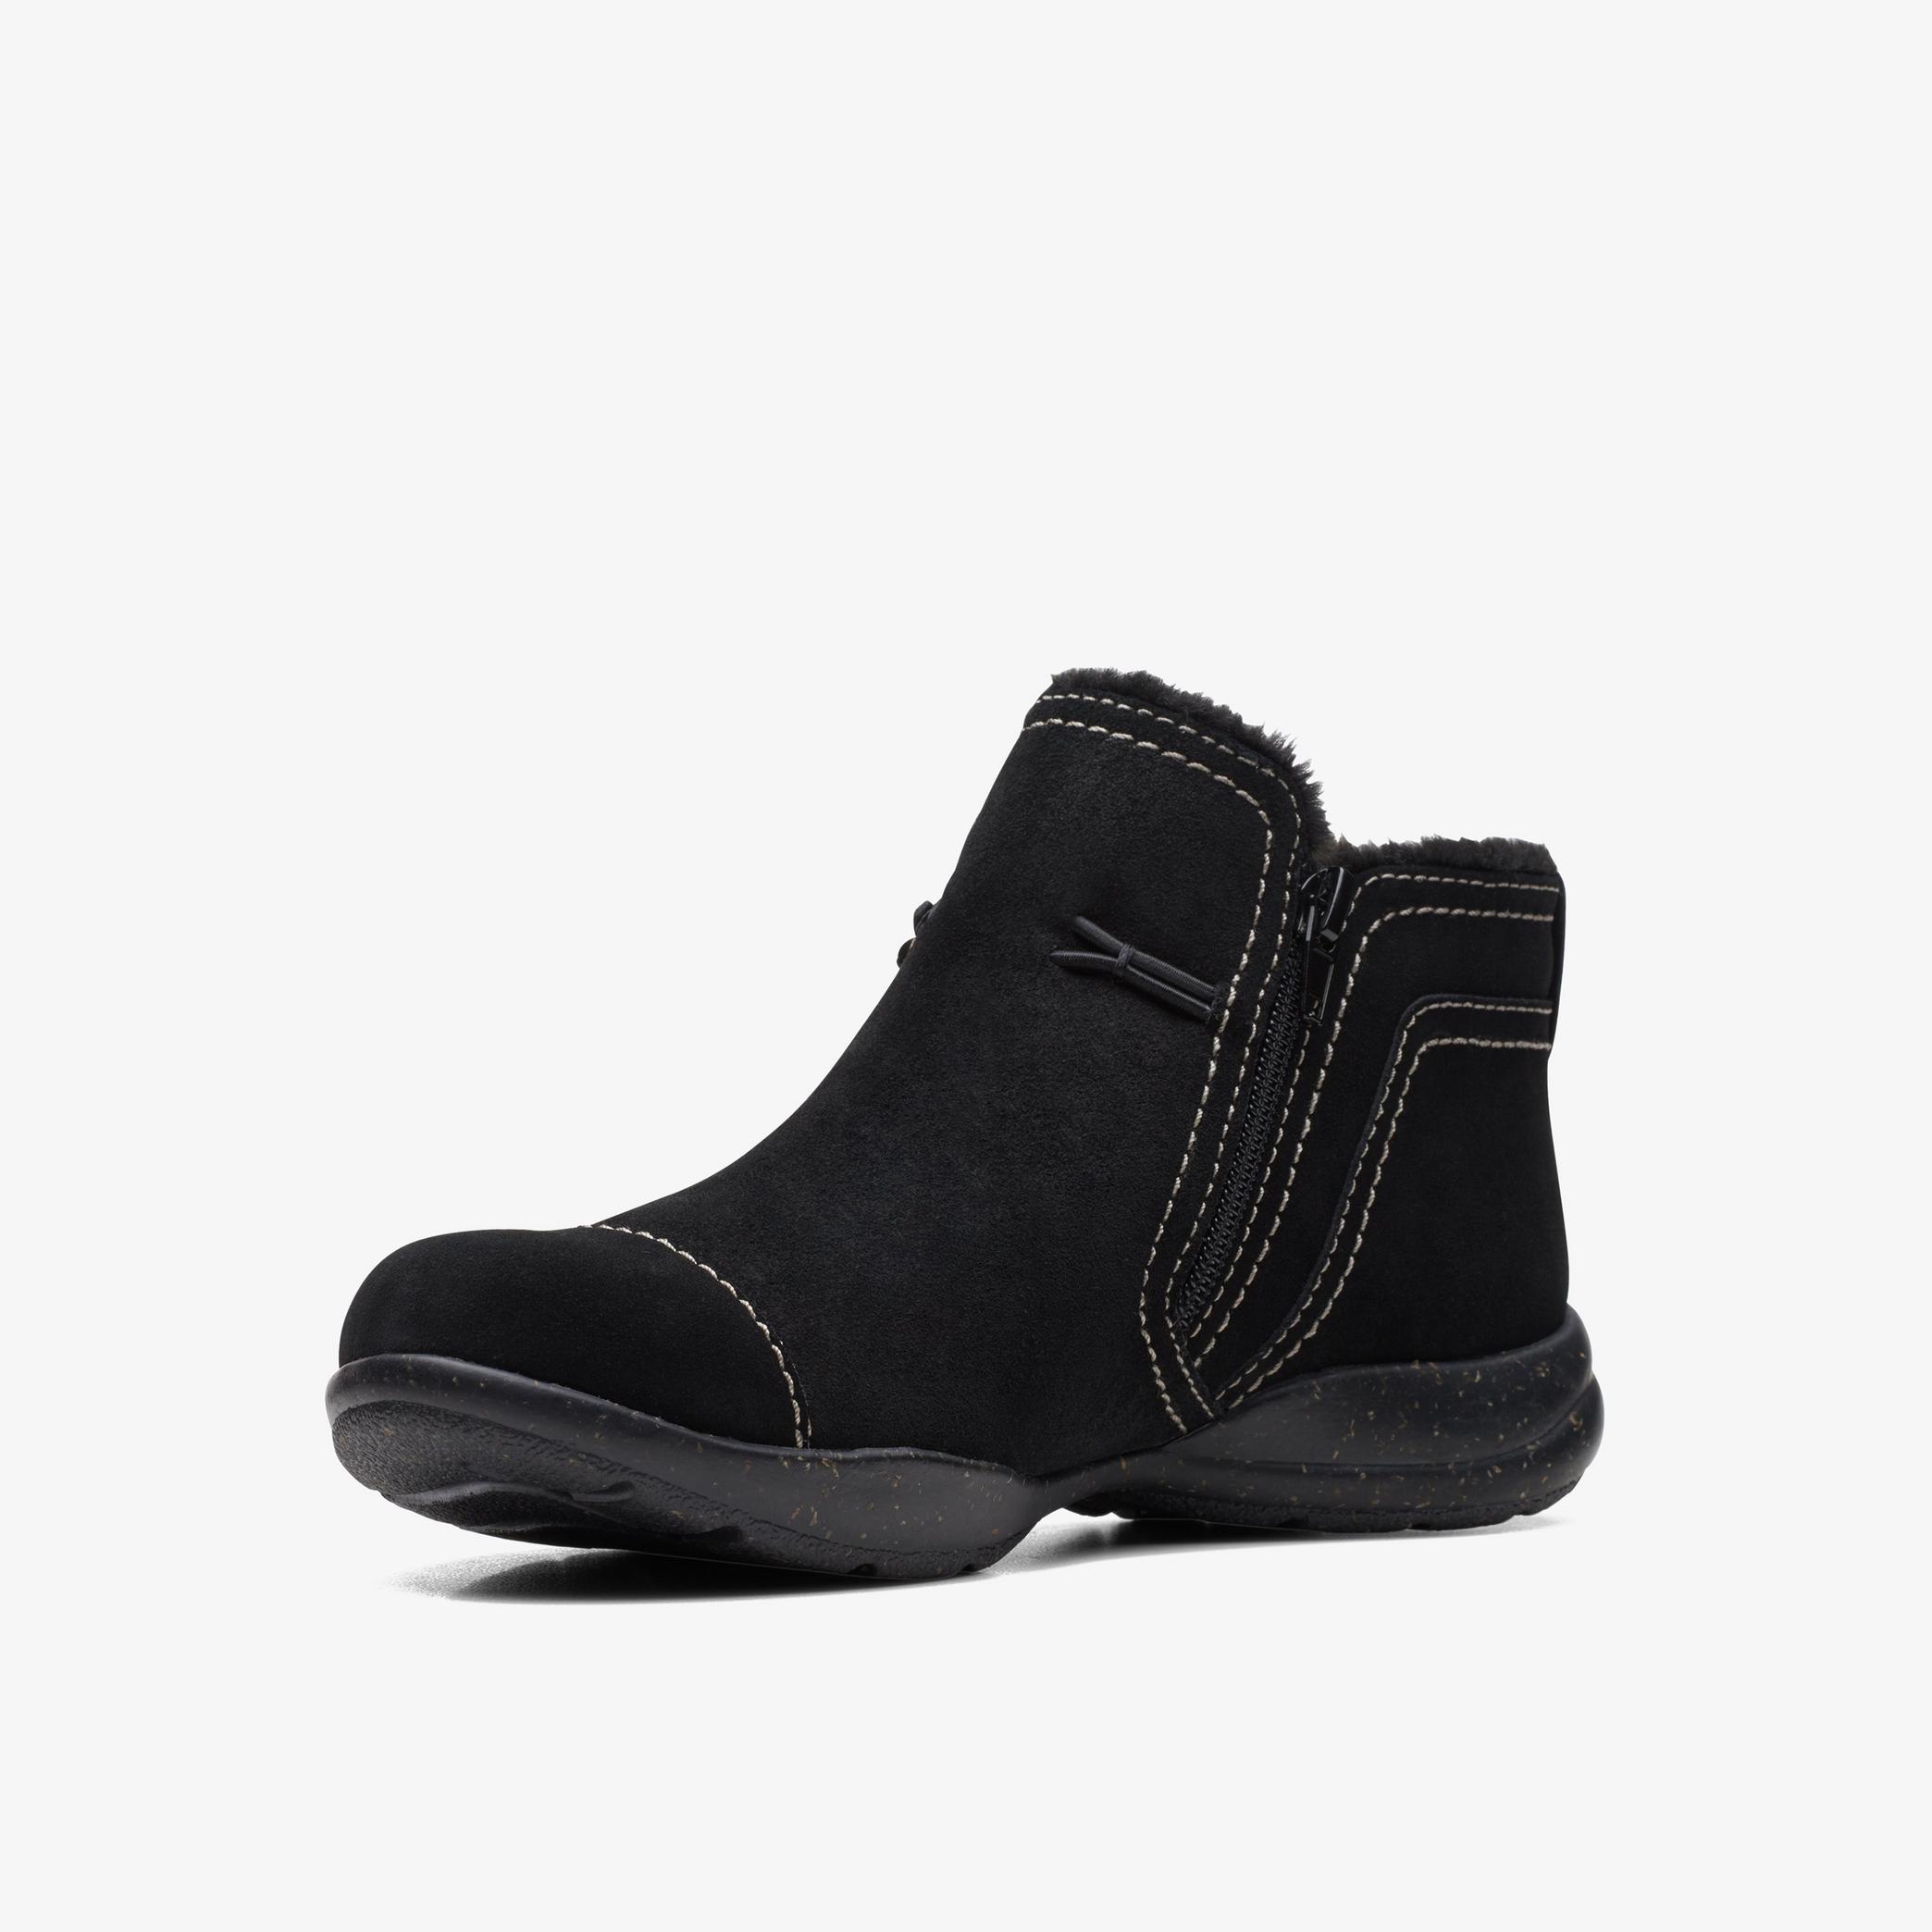 Roseville Aster Black Suede Ankle Boots, view 4 of 6